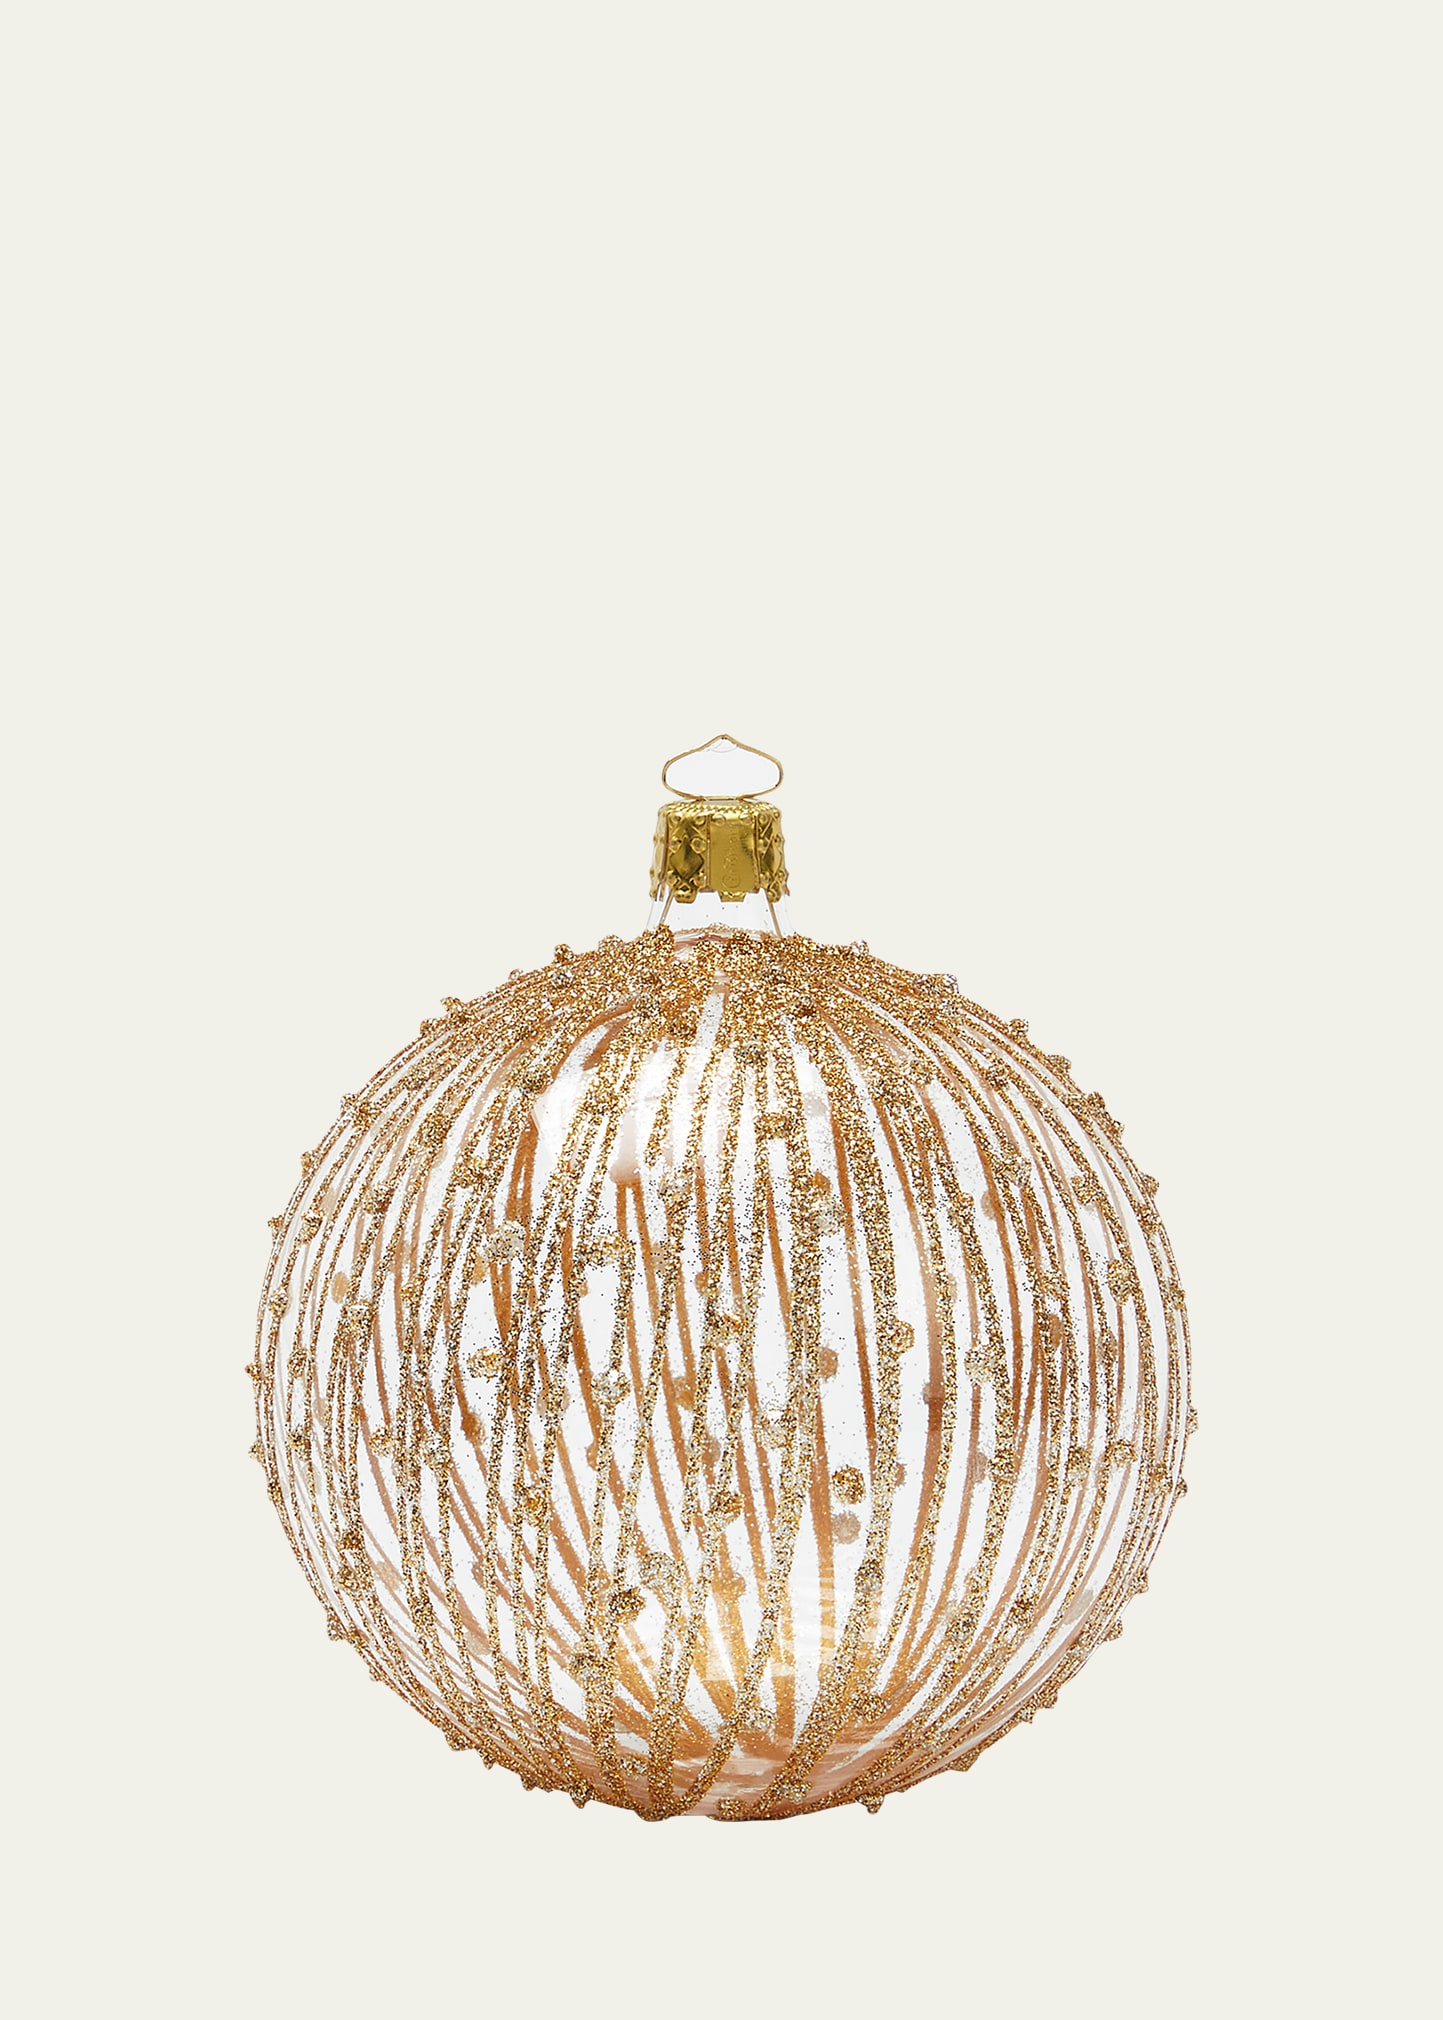 Bergdorf Goodman Kristall Crystal Clear 4" Ball Ornament In Gold